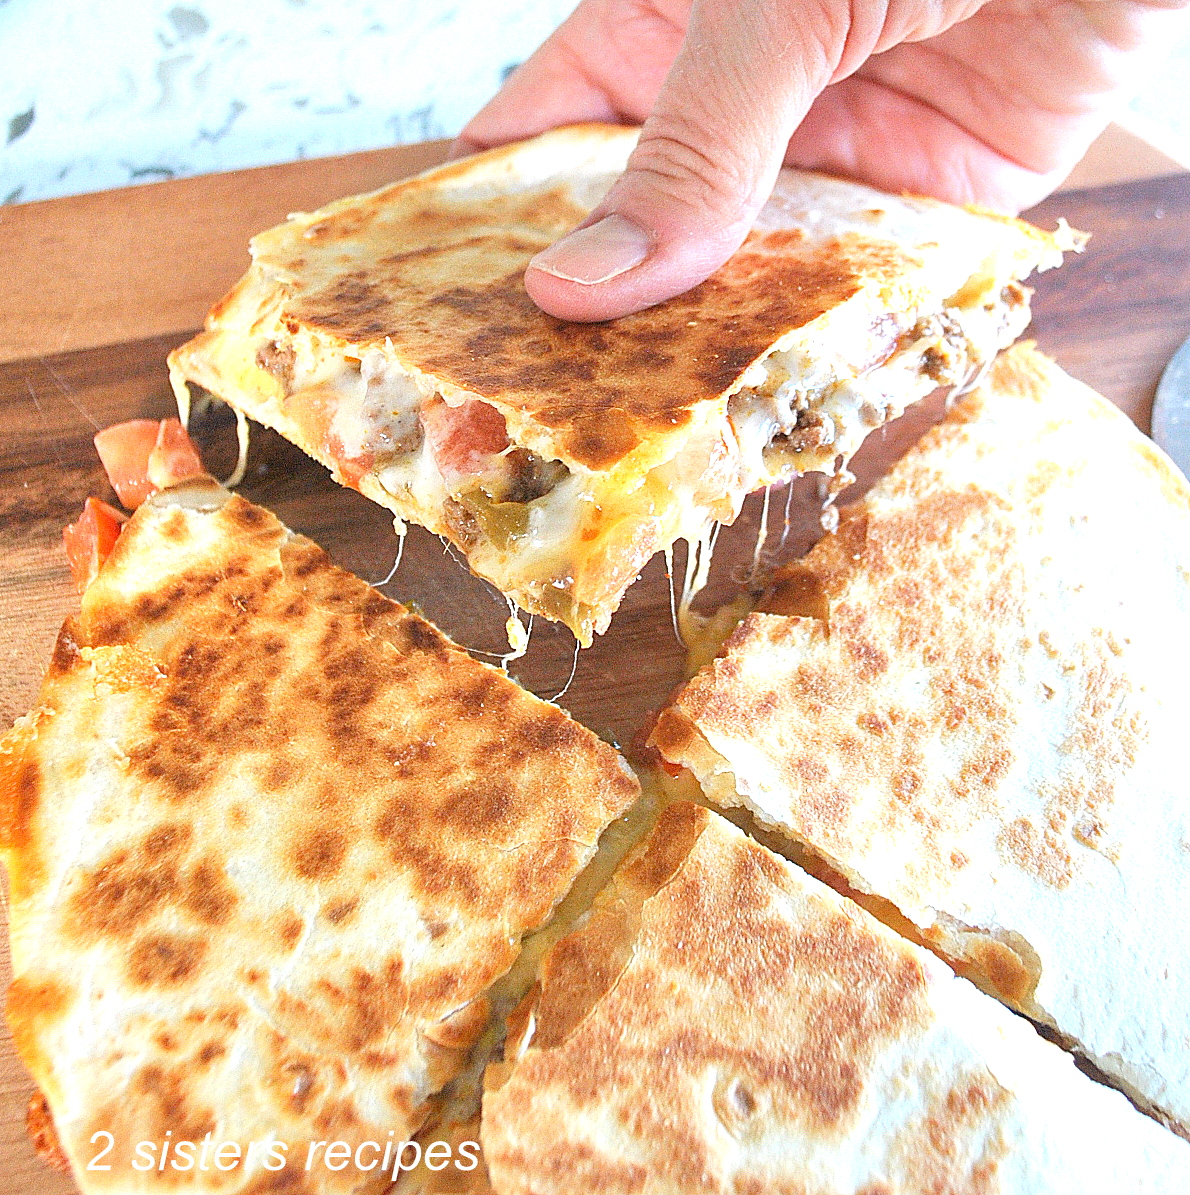 A hand is picking up a piece of loaded quesadilla. by 2sistersrecipes.com